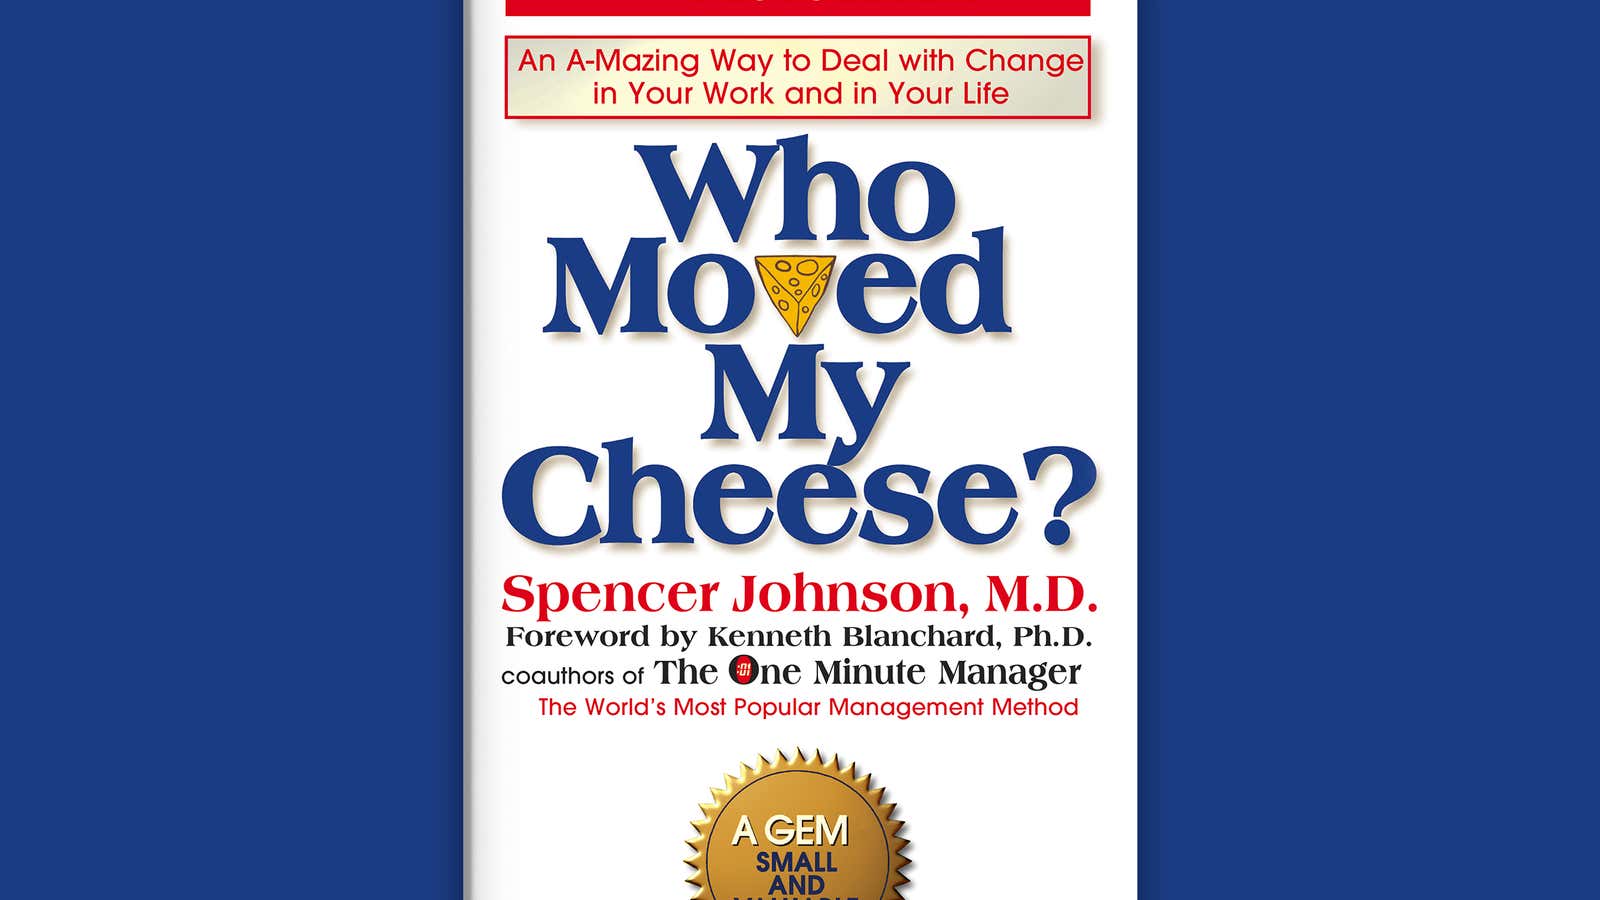 “Who Moved My Cheese?” by Spencer Johnson